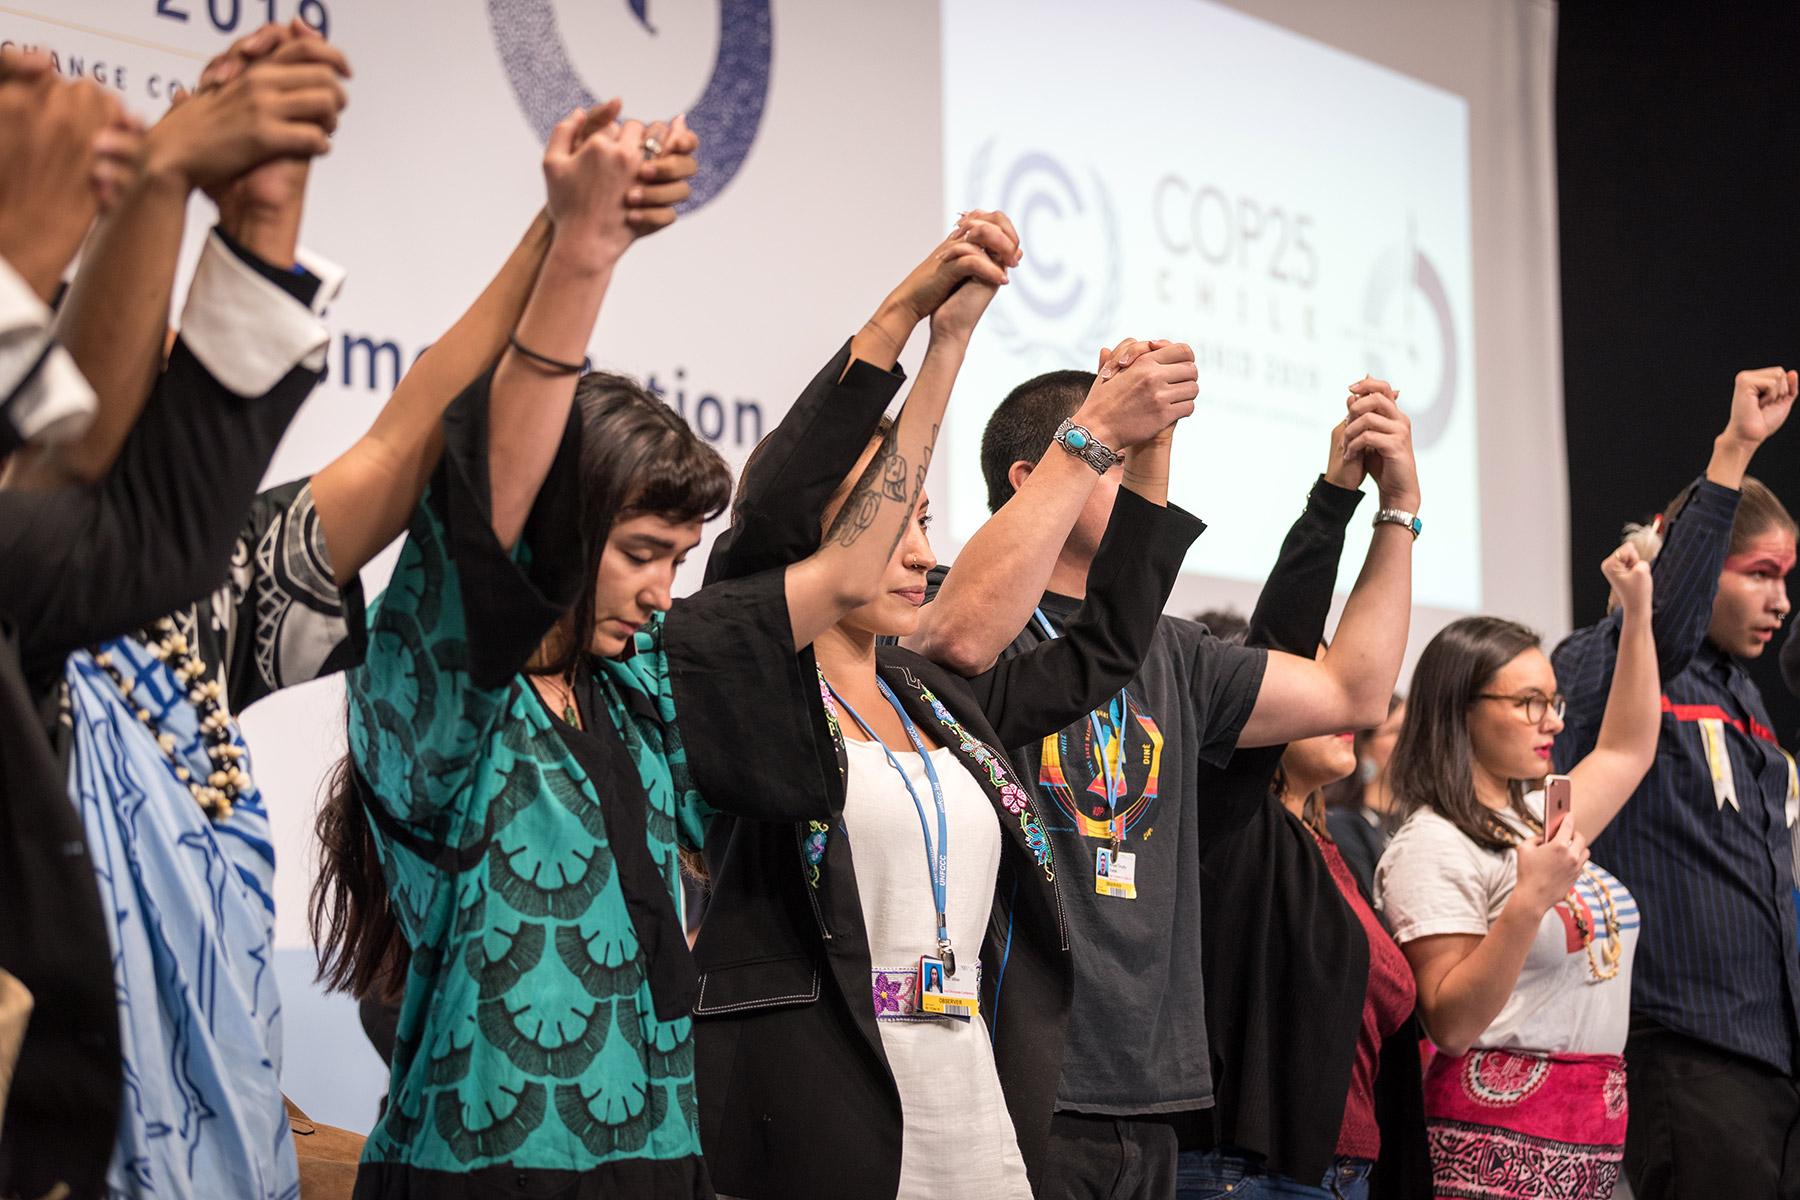 People of faith standing together for climate justice during COP25 in Madrid, Spain. Photo: LWF/Albin Hillert